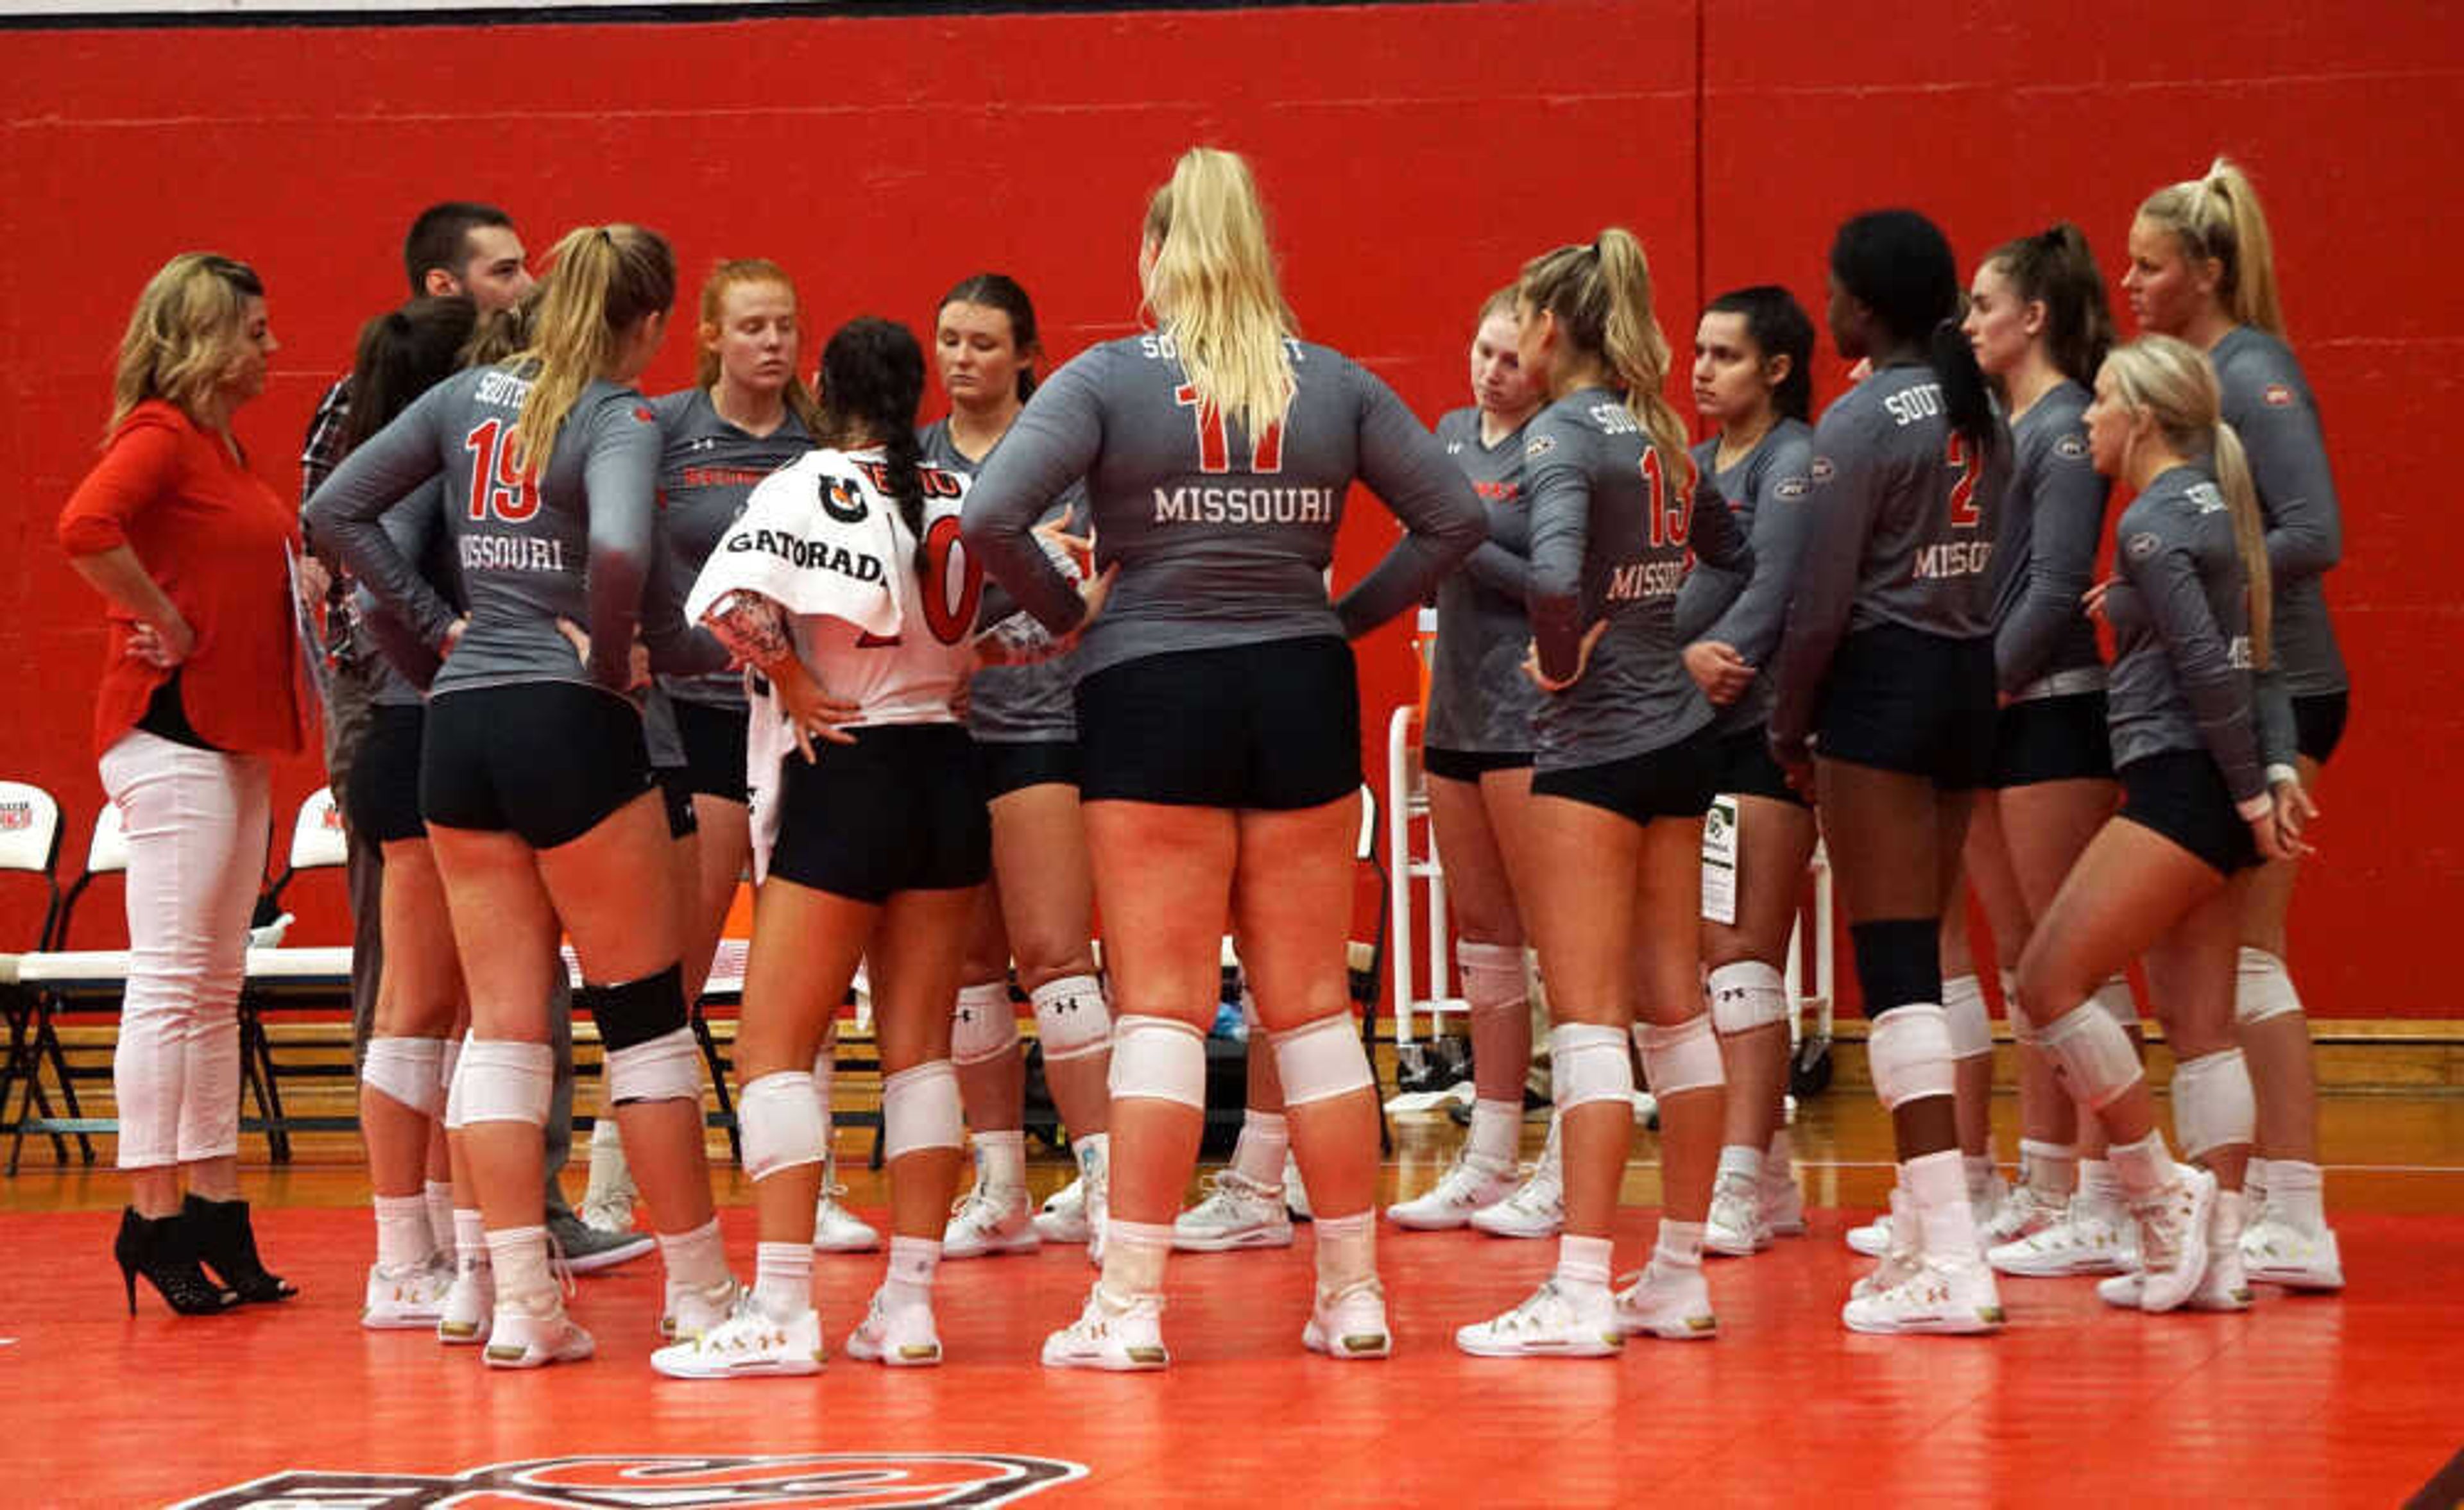 SEMO’s Volleyball team talks with Head Coach, Julie Yankus and Assistant Coach, Matt Stolz about strategies for the game during their five set loss to UT Martin on Sept. 29 at Houck Field House in Cape Girardeau.